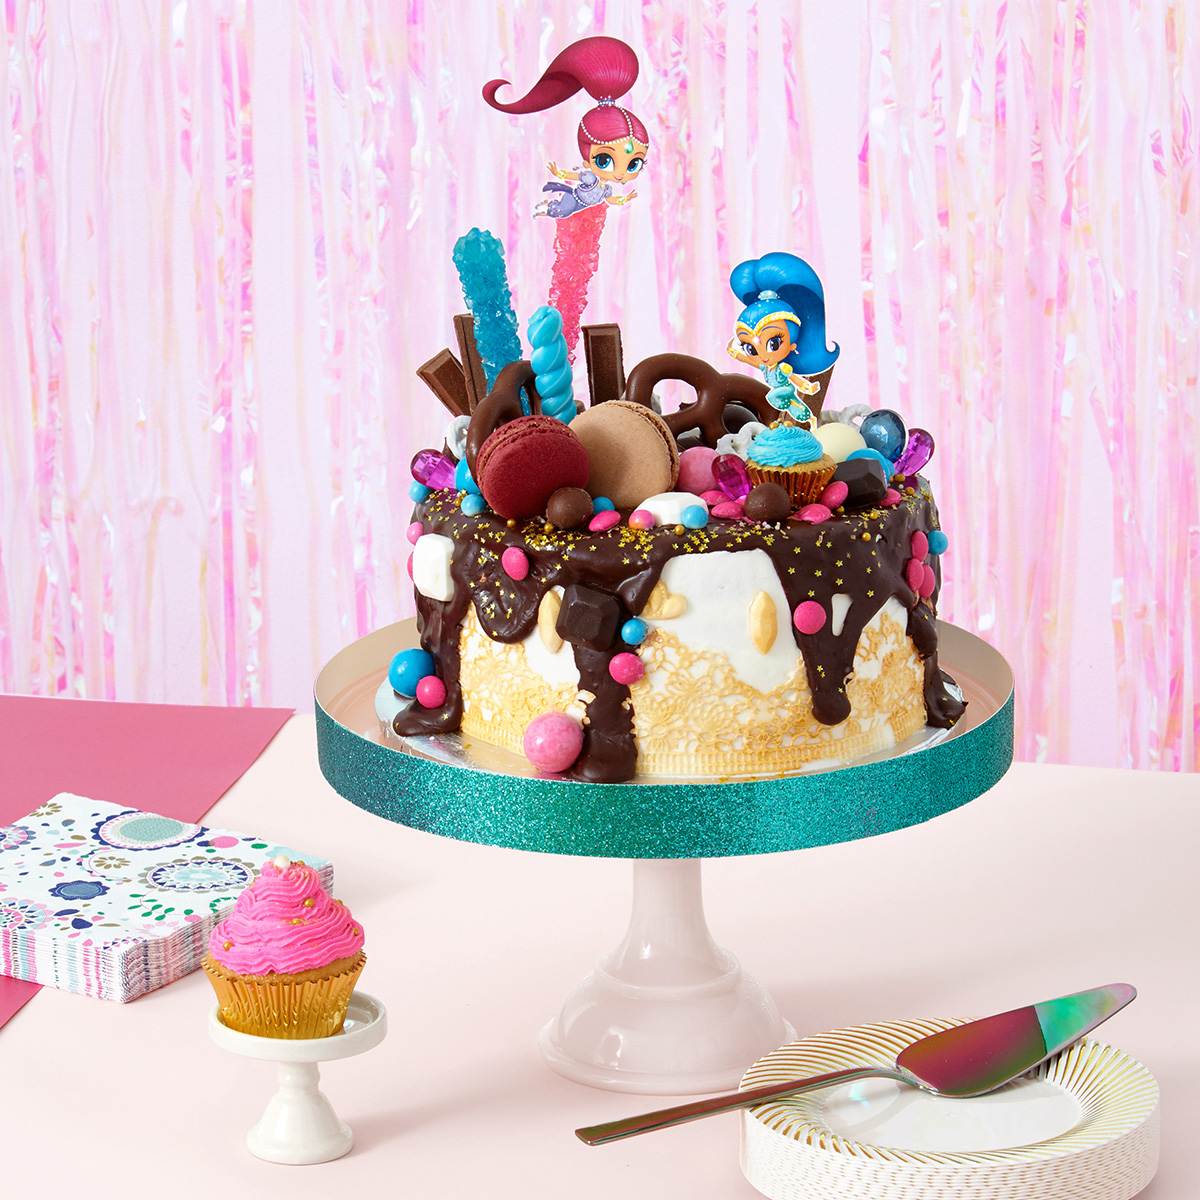 Shimmer and Shine "Oopsies!" Birthday Cake